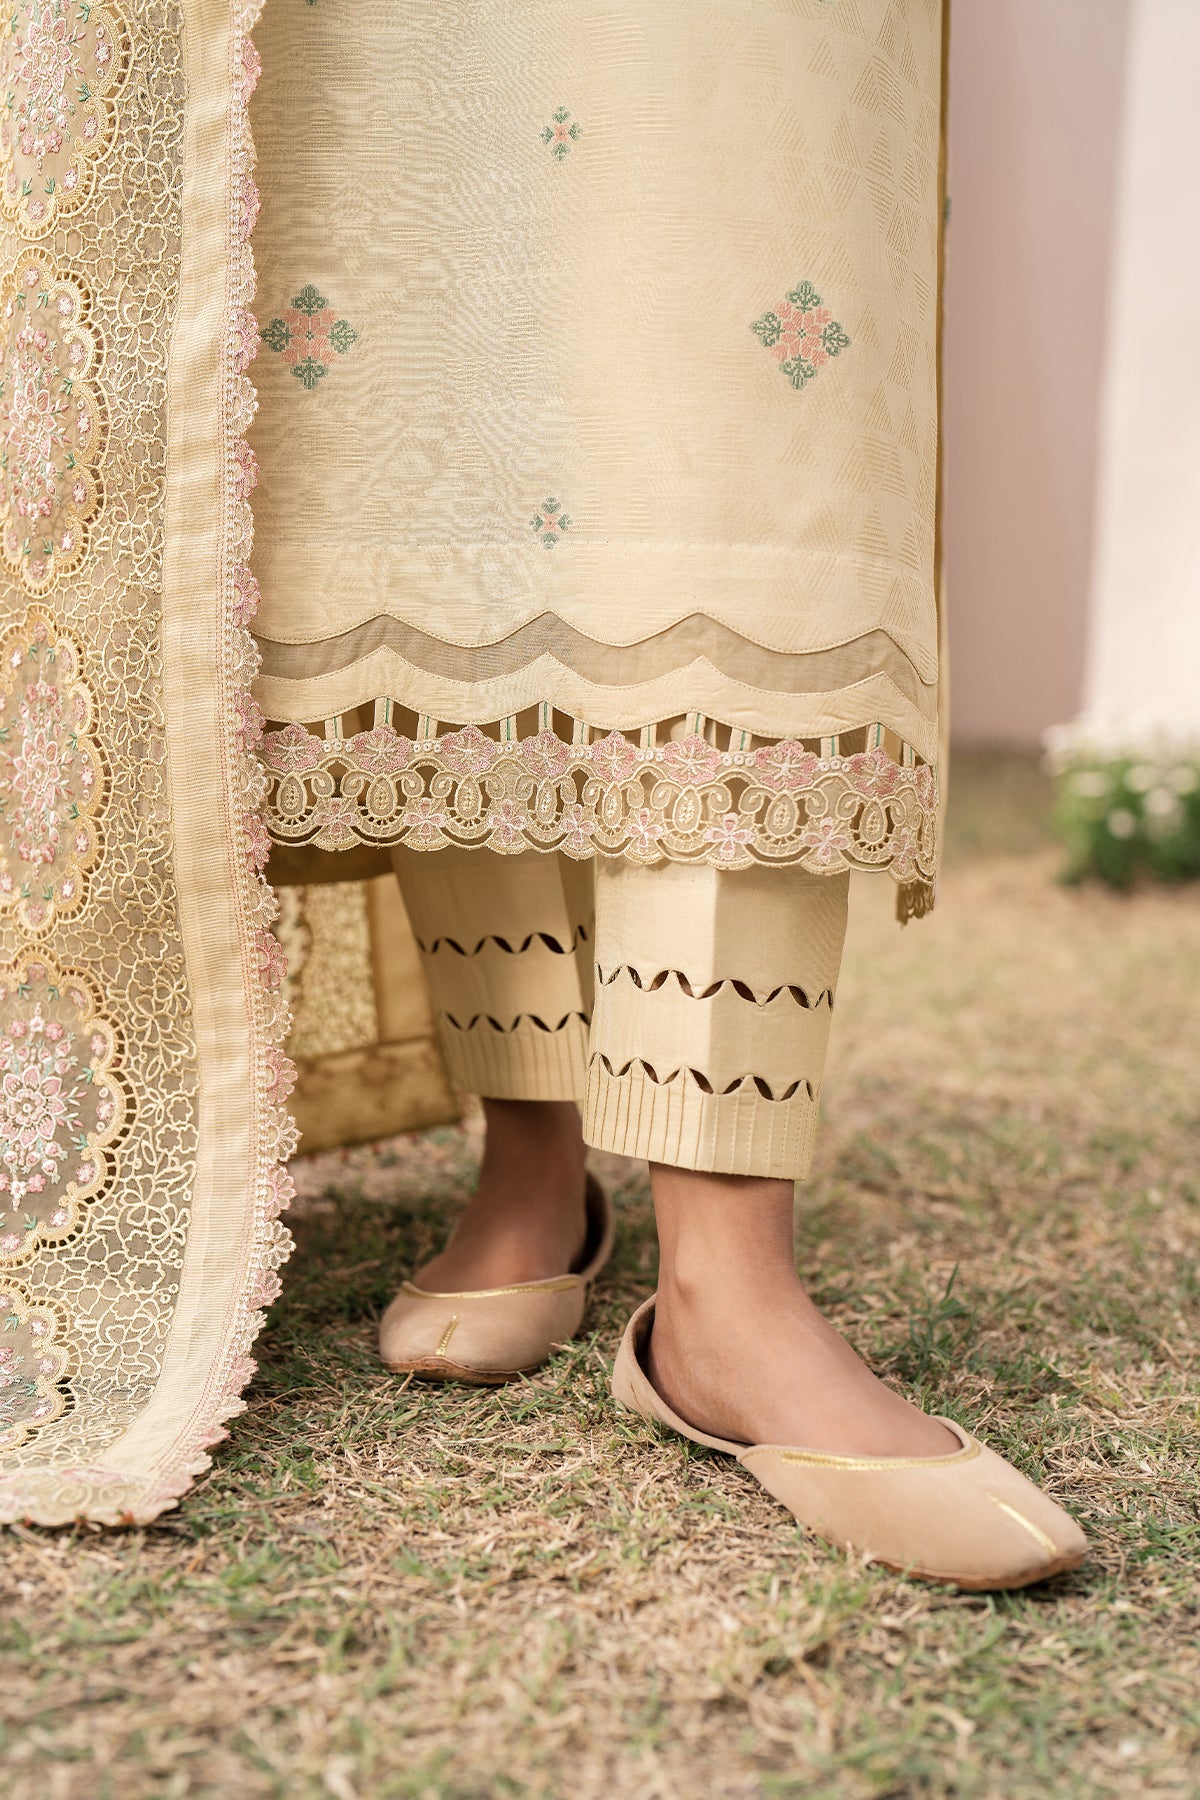 EMBROIDERED JACQUARD LAWN UF-612